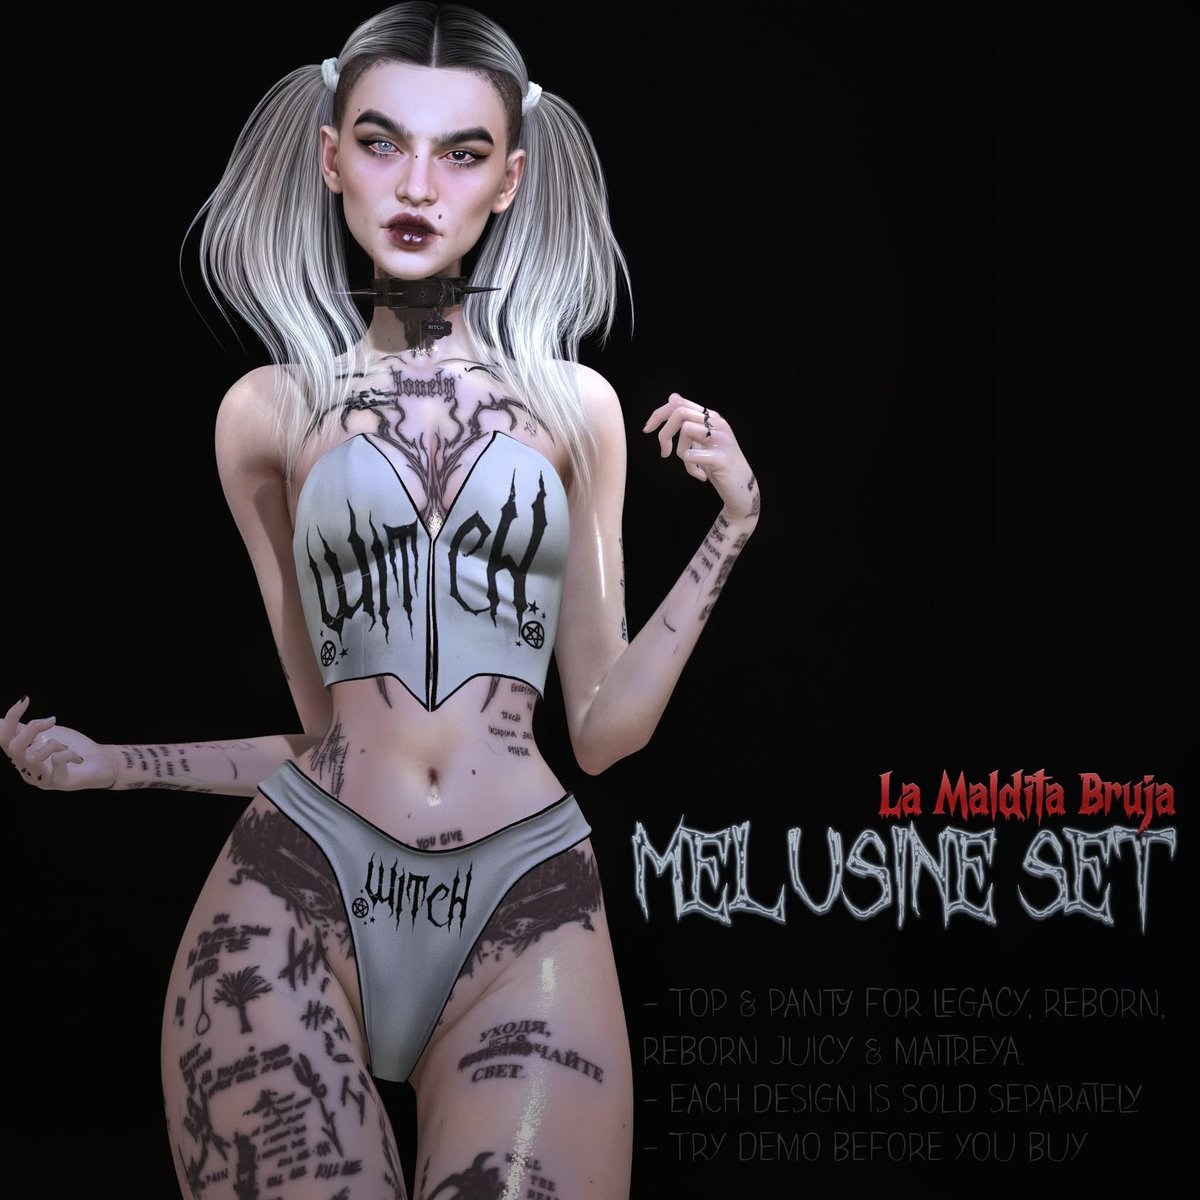 🖤 Melusine Set 🖤 at La Maldita Bruja maps.secondlife.com/secondlife/She… 60L for this weekend - Top and Panty for Legacy, Reborn, Rebor Juicy & Maitreya. - Try DEMO before you buy